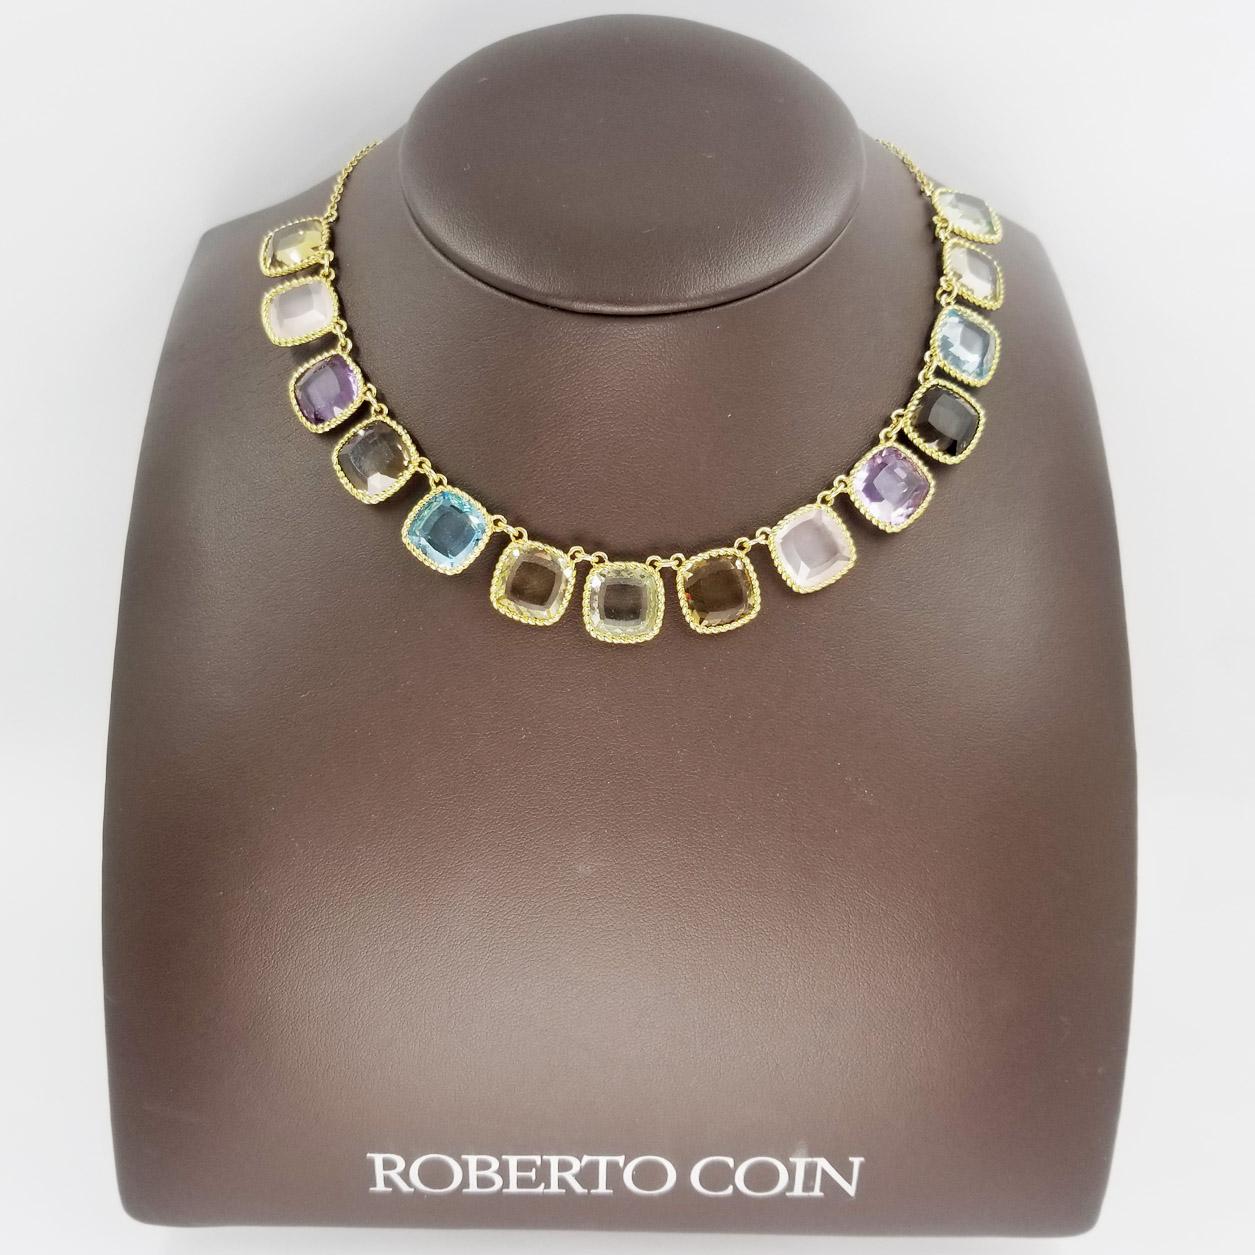 18 karat yellow gold necklace from the Roberto Coin Ipanema collection. The bib style necklace, model number 915954AY18MX, features fourteen cushion cut lemon citrine, smokey quartz, citrine, prasiolite, rose quartz, amethyst, and blue topaz. It is